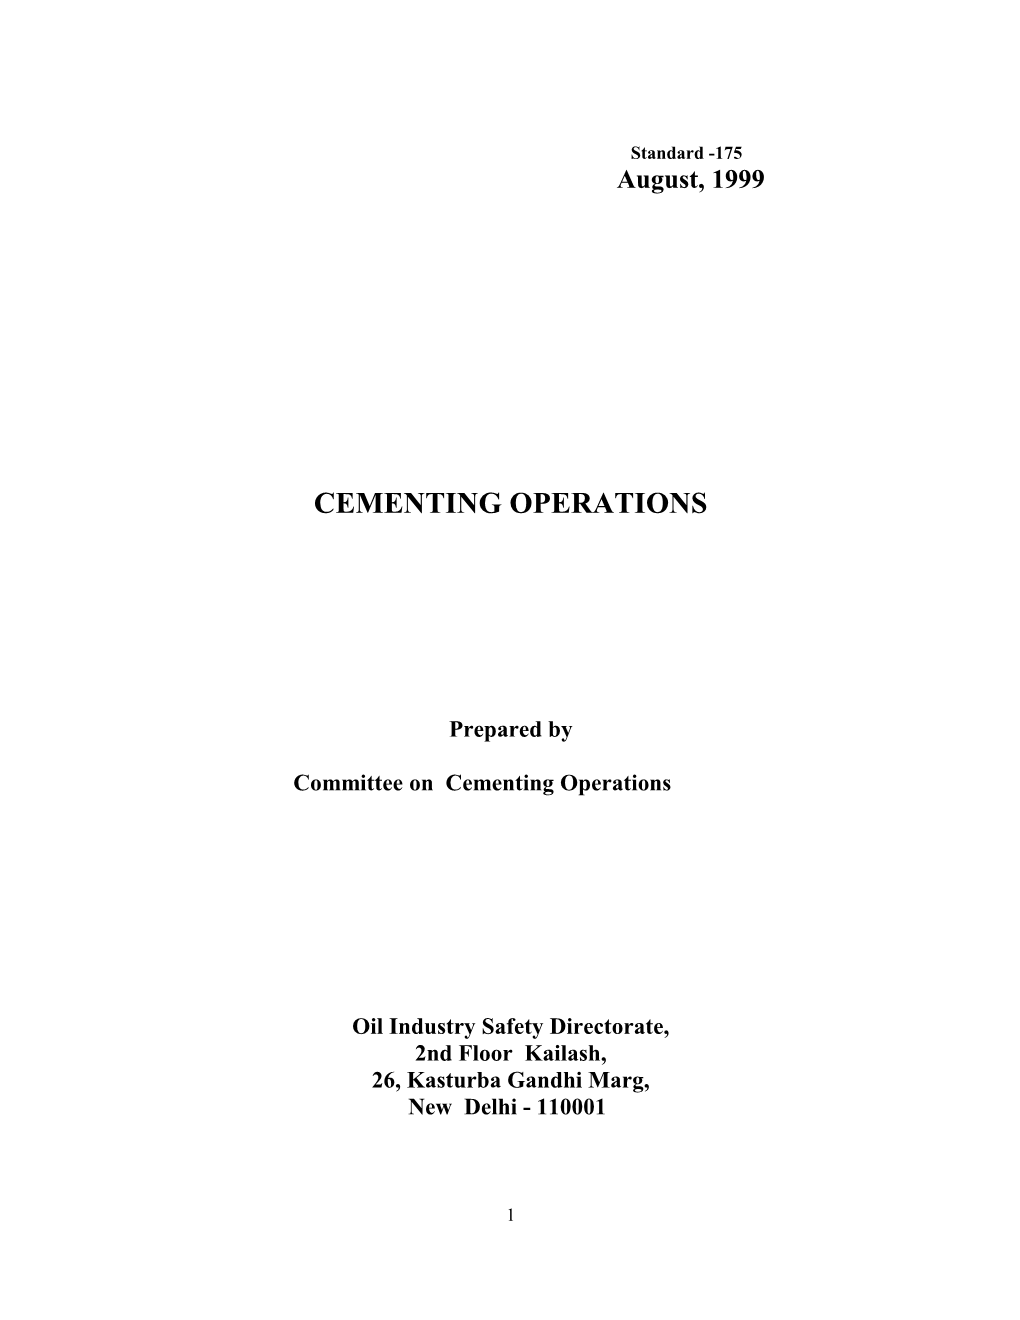 Cementing Operations